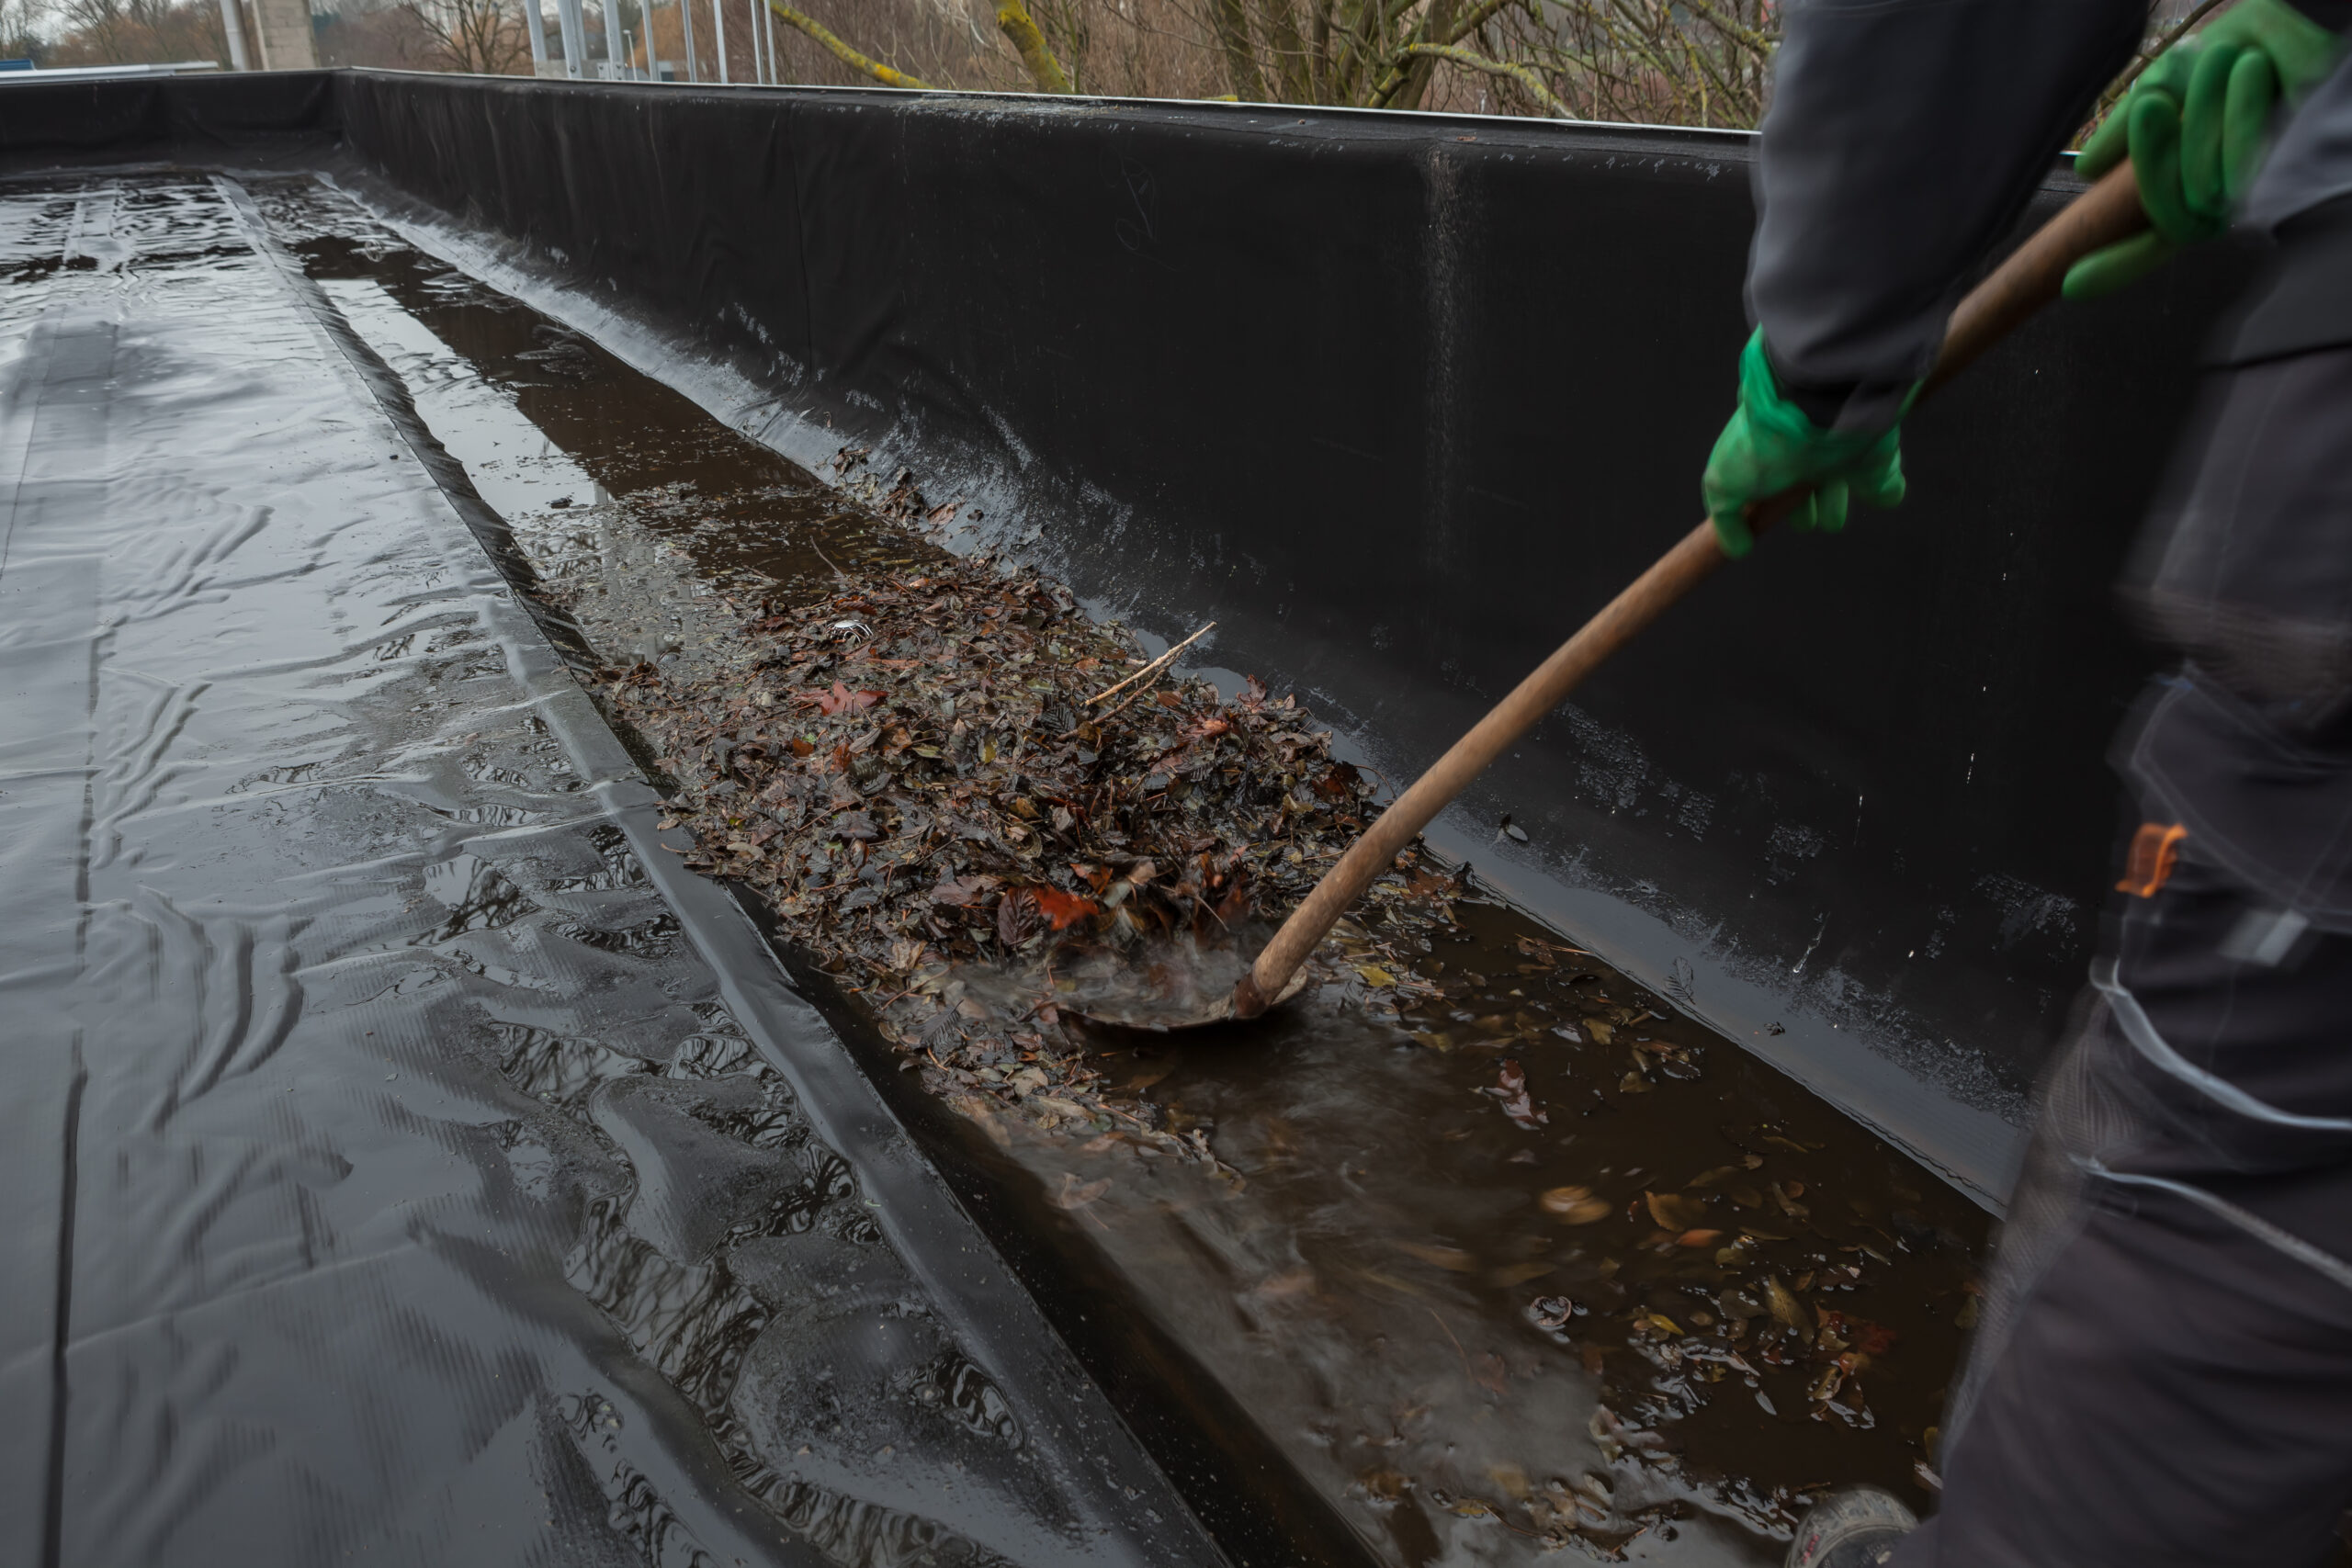 A man wearing protective clothing uses a shovel to remove pooled water and accumulated leaves from a black flat PVC roof